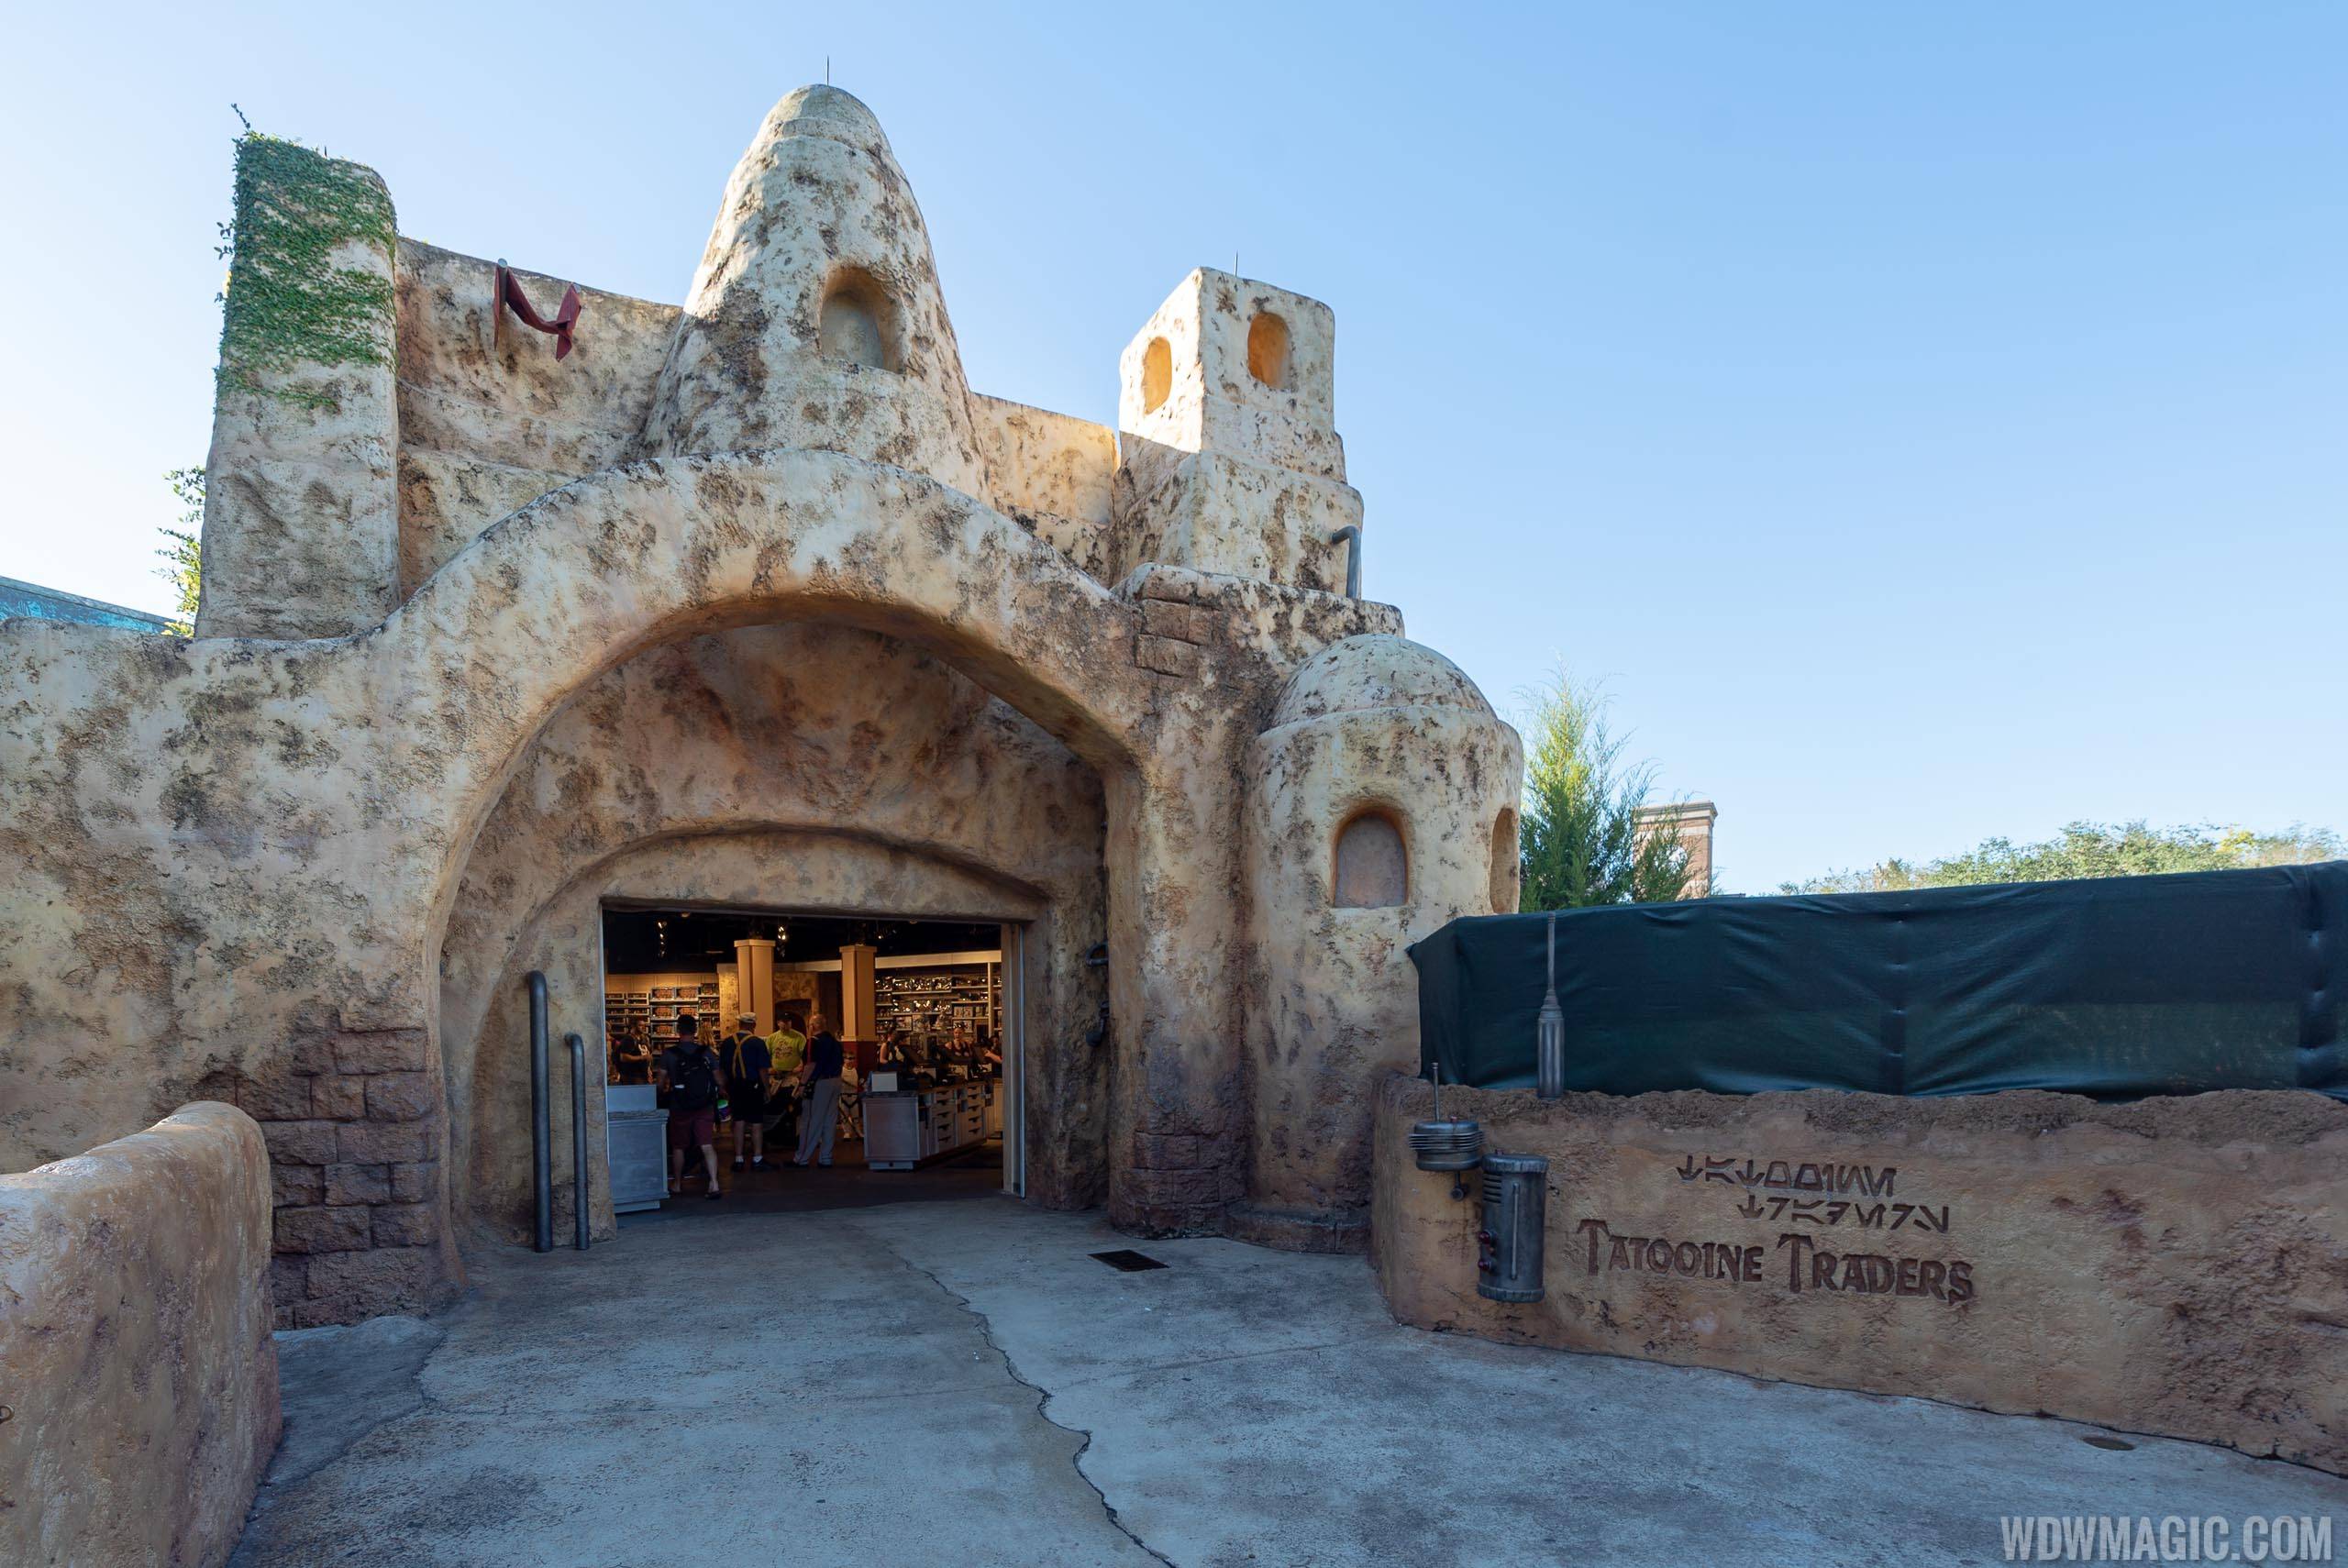 PHOTOS - Latest look at the Tatooine Traders changes